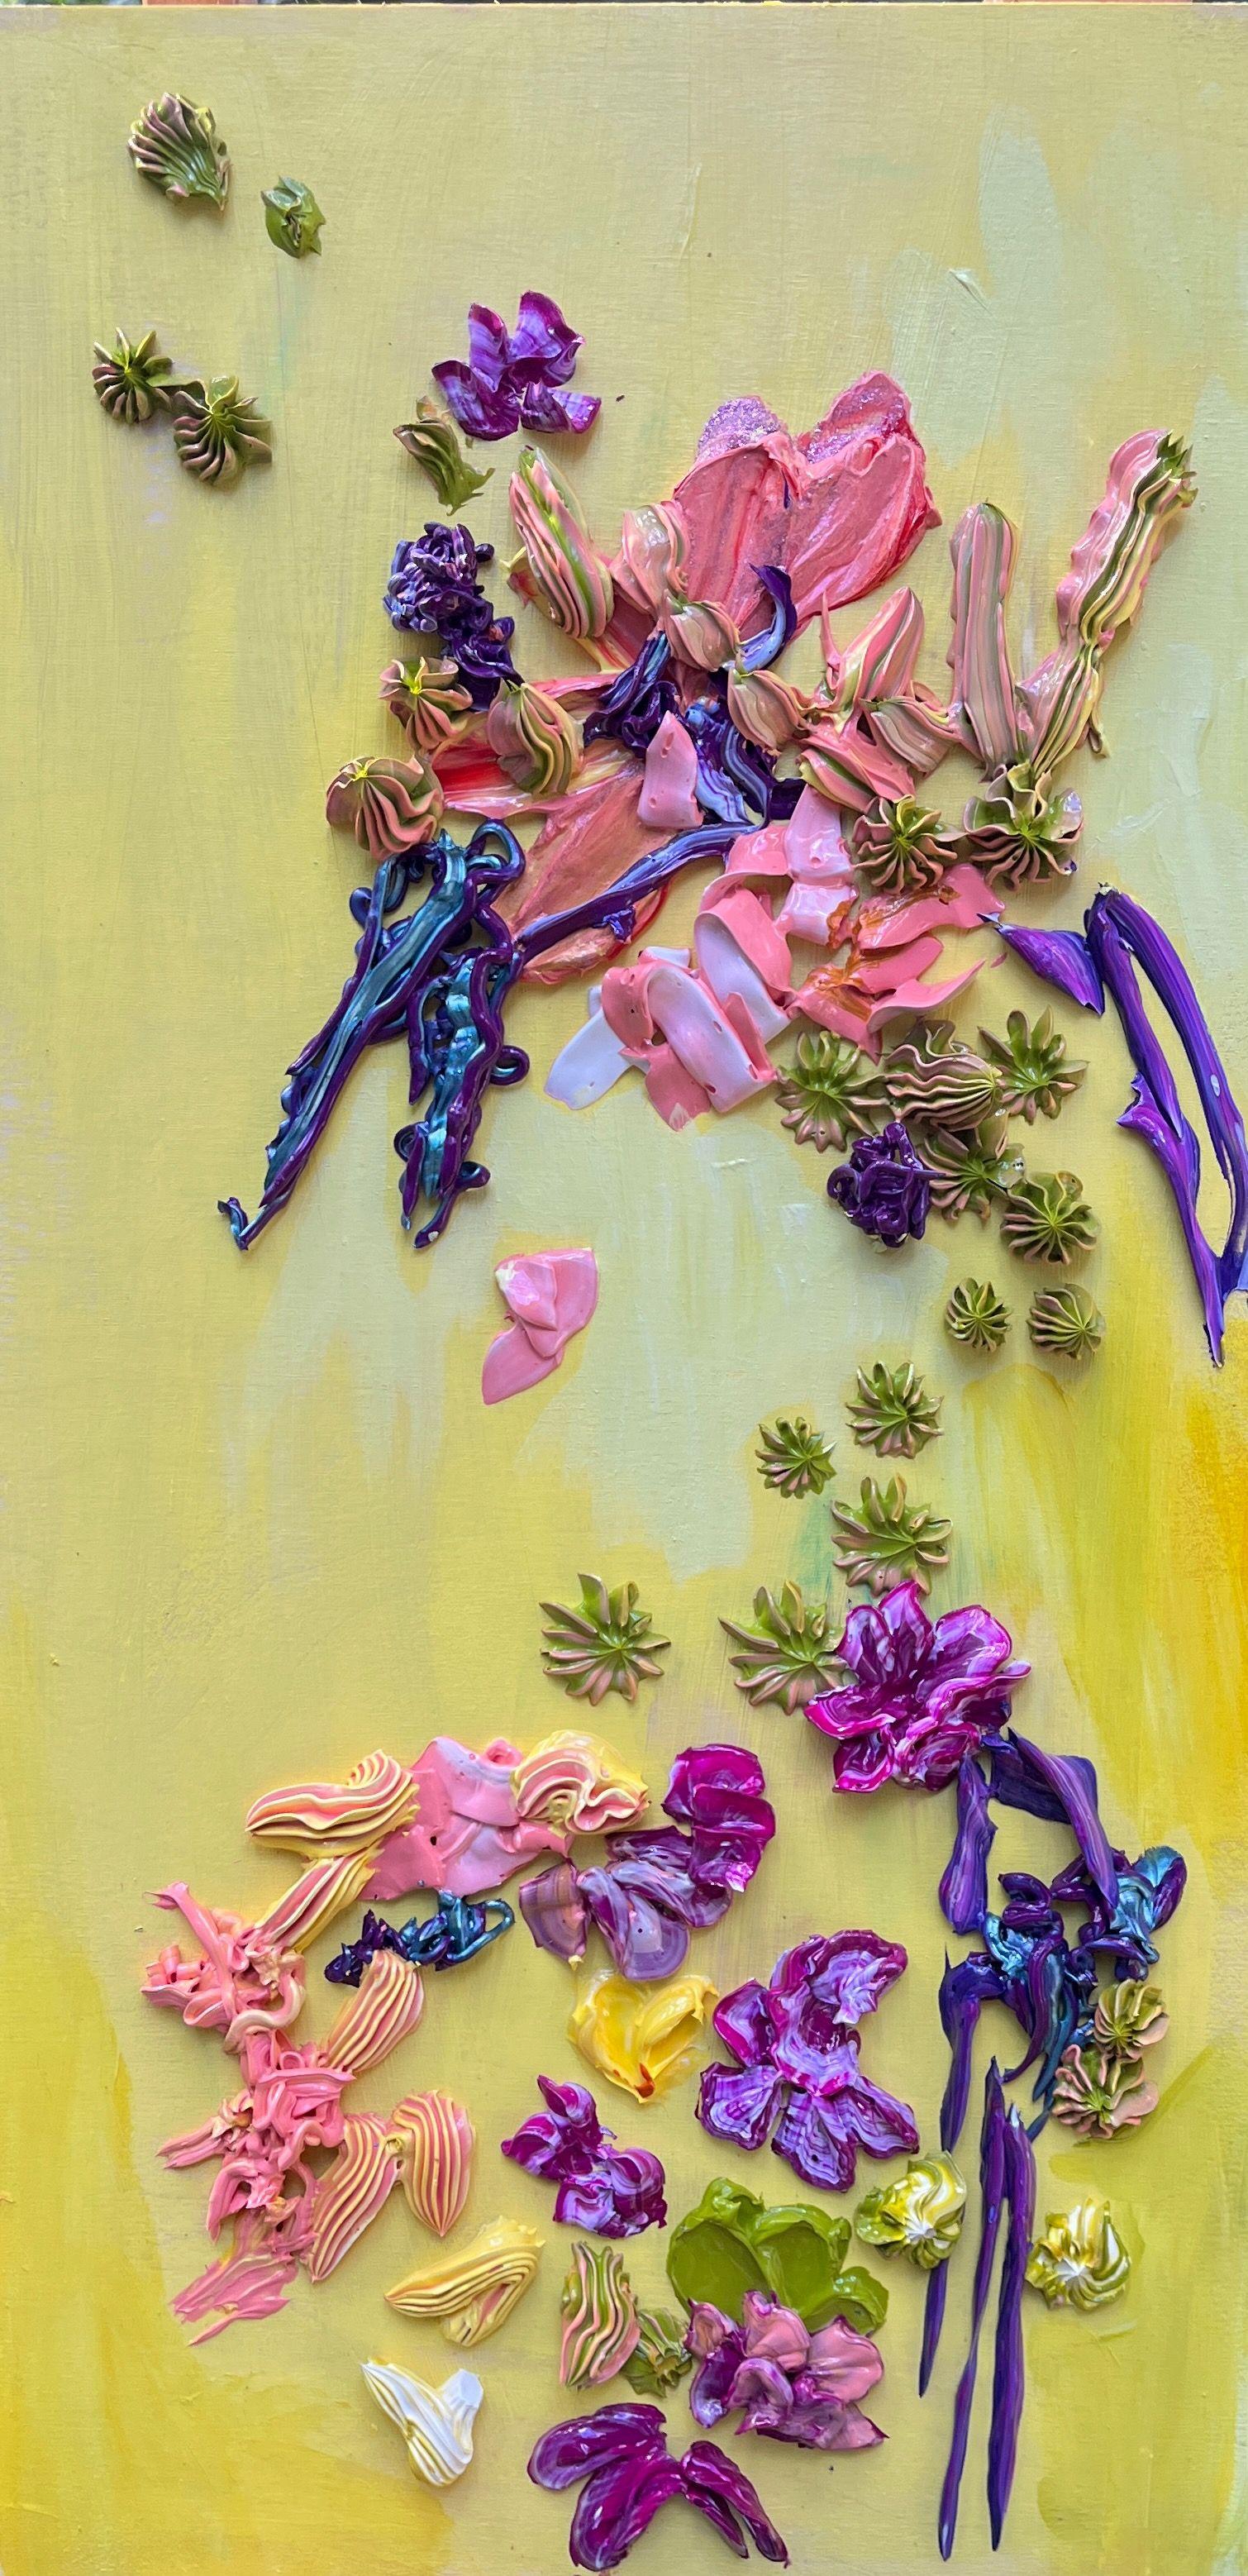 Julia Hacker's latest direction in art is experimenting with different qualities of paint. Recently the artist started using very thick applications of acrylic paint. She sculpts with heavy, gell-like paint, creating 3d flowers on the wood panel.